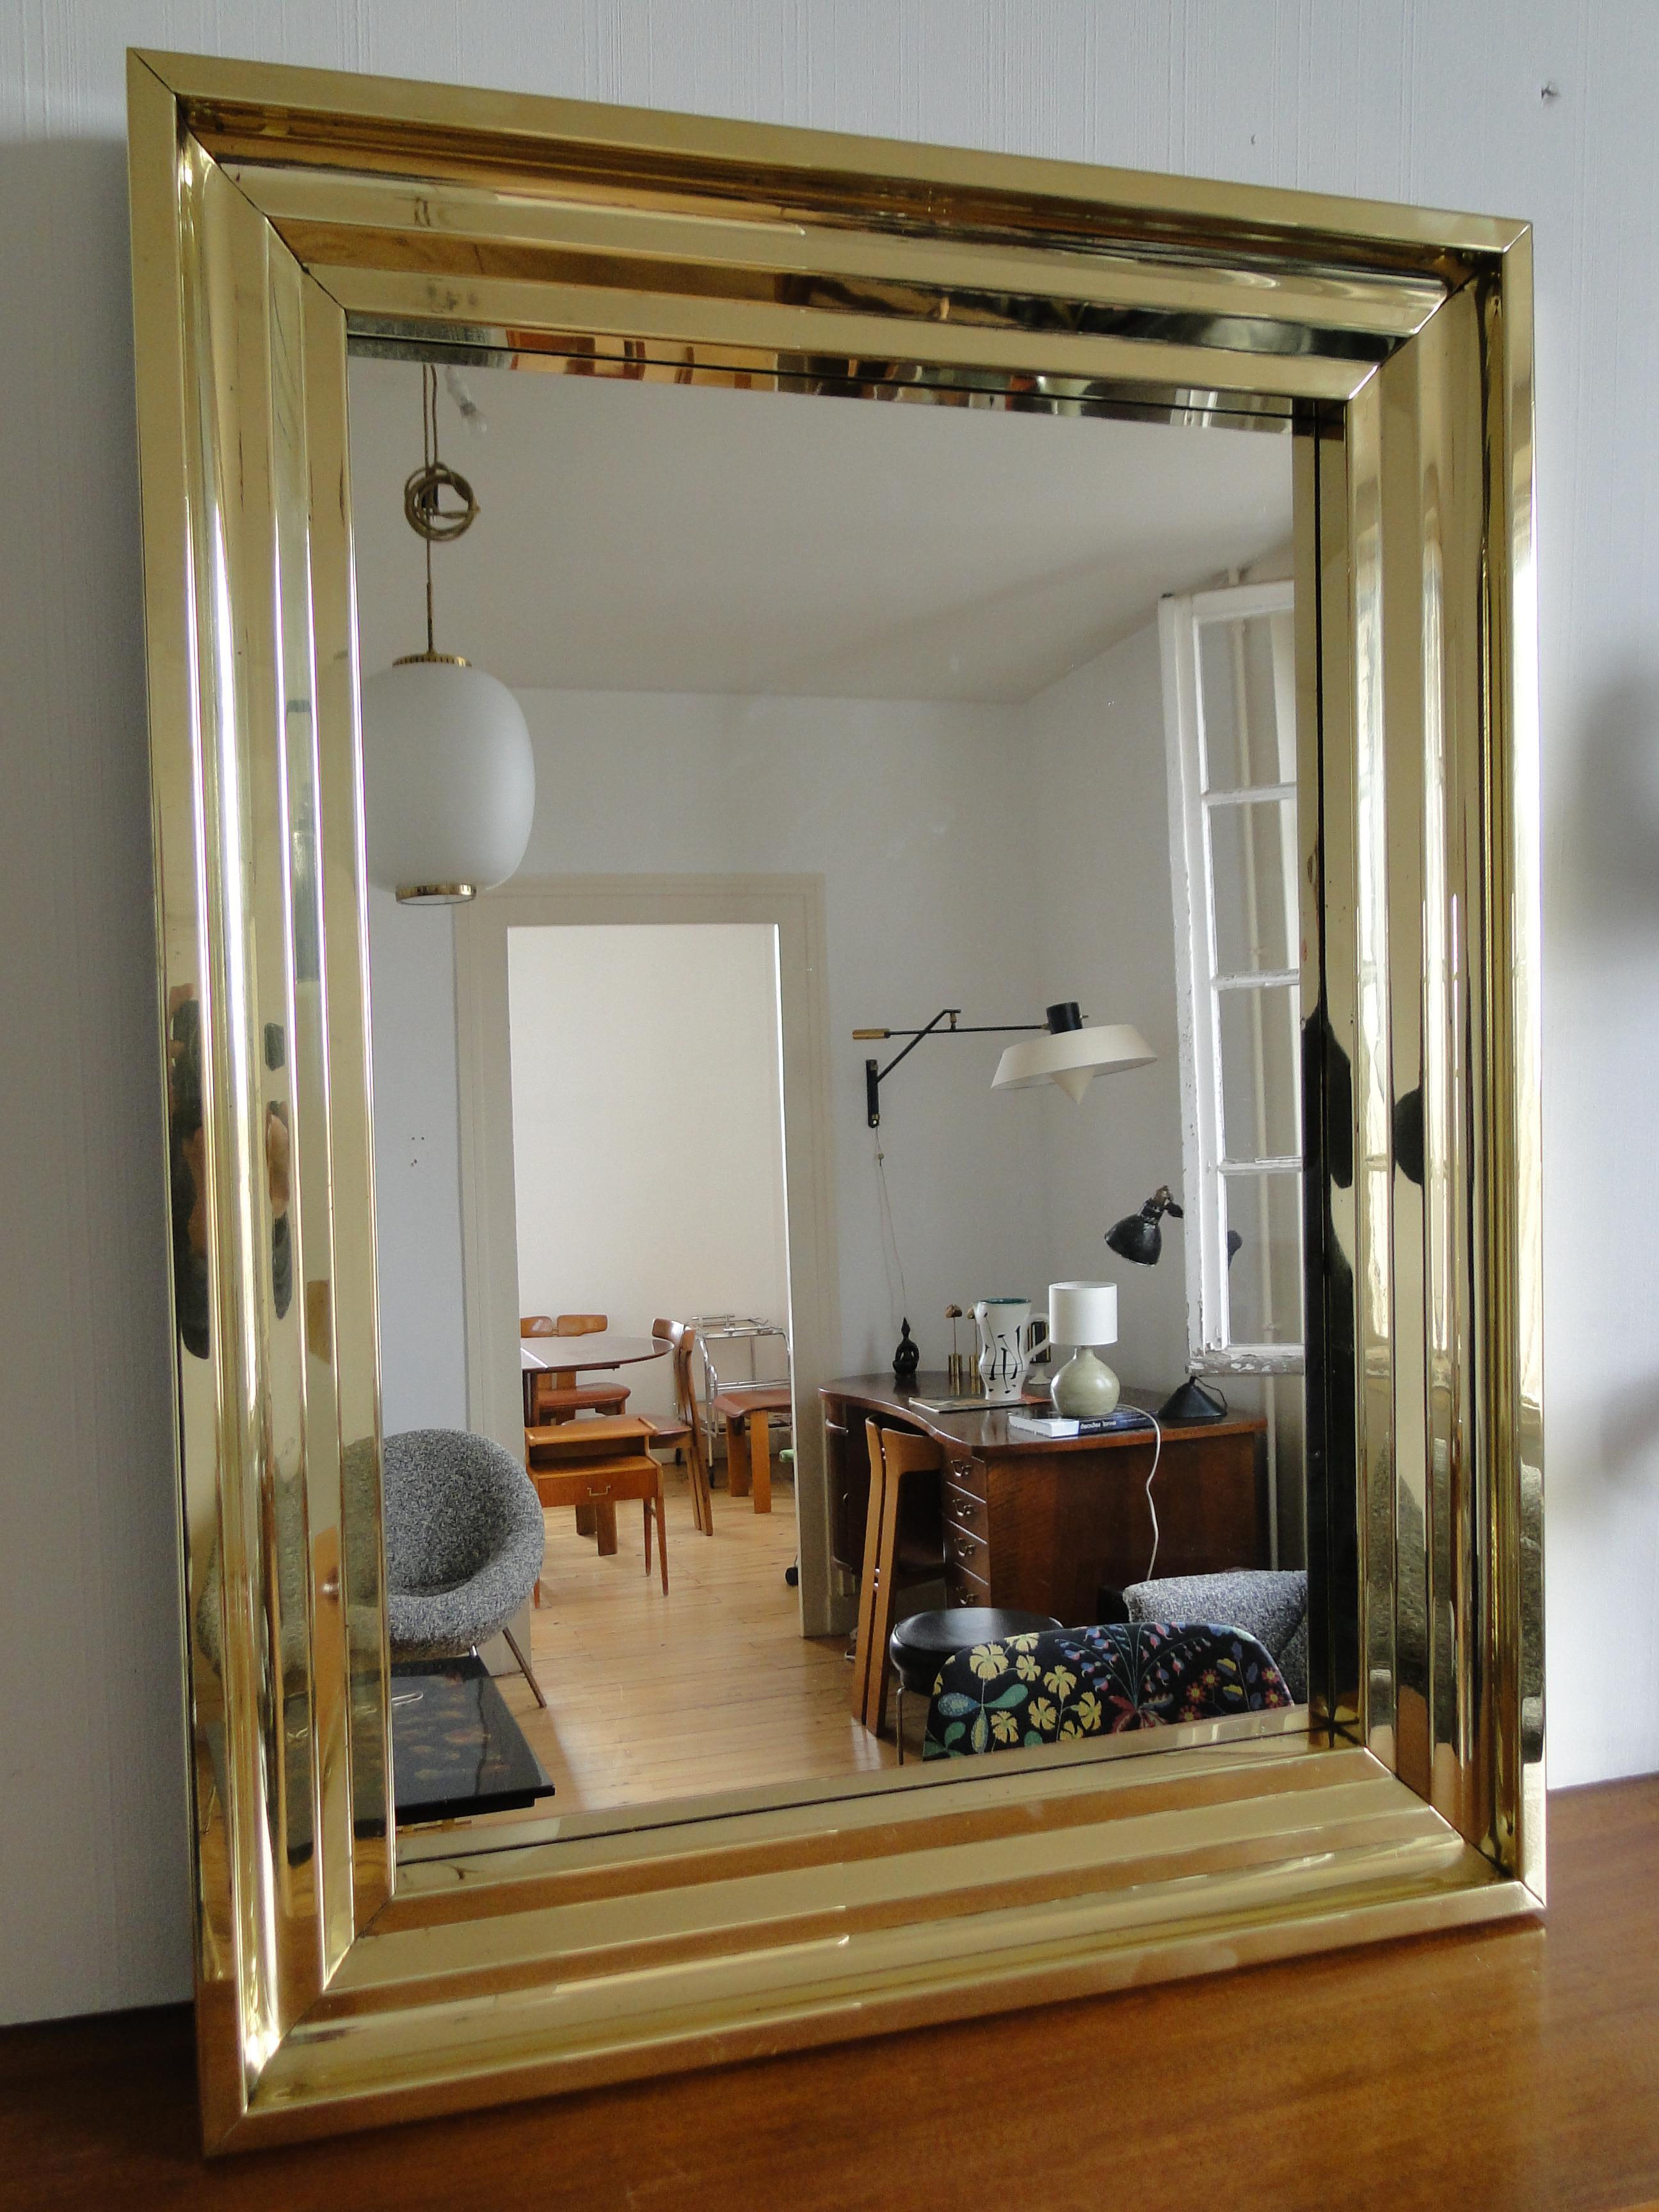 Old polished brass fireplace frame from the Bordeaux region (south west of France), mounted as a mirror from the 1940.

Made in France.

The mirror can be positioned vertically or horizontally. 
Outer bezel in curved polished brass

New mirror

Very